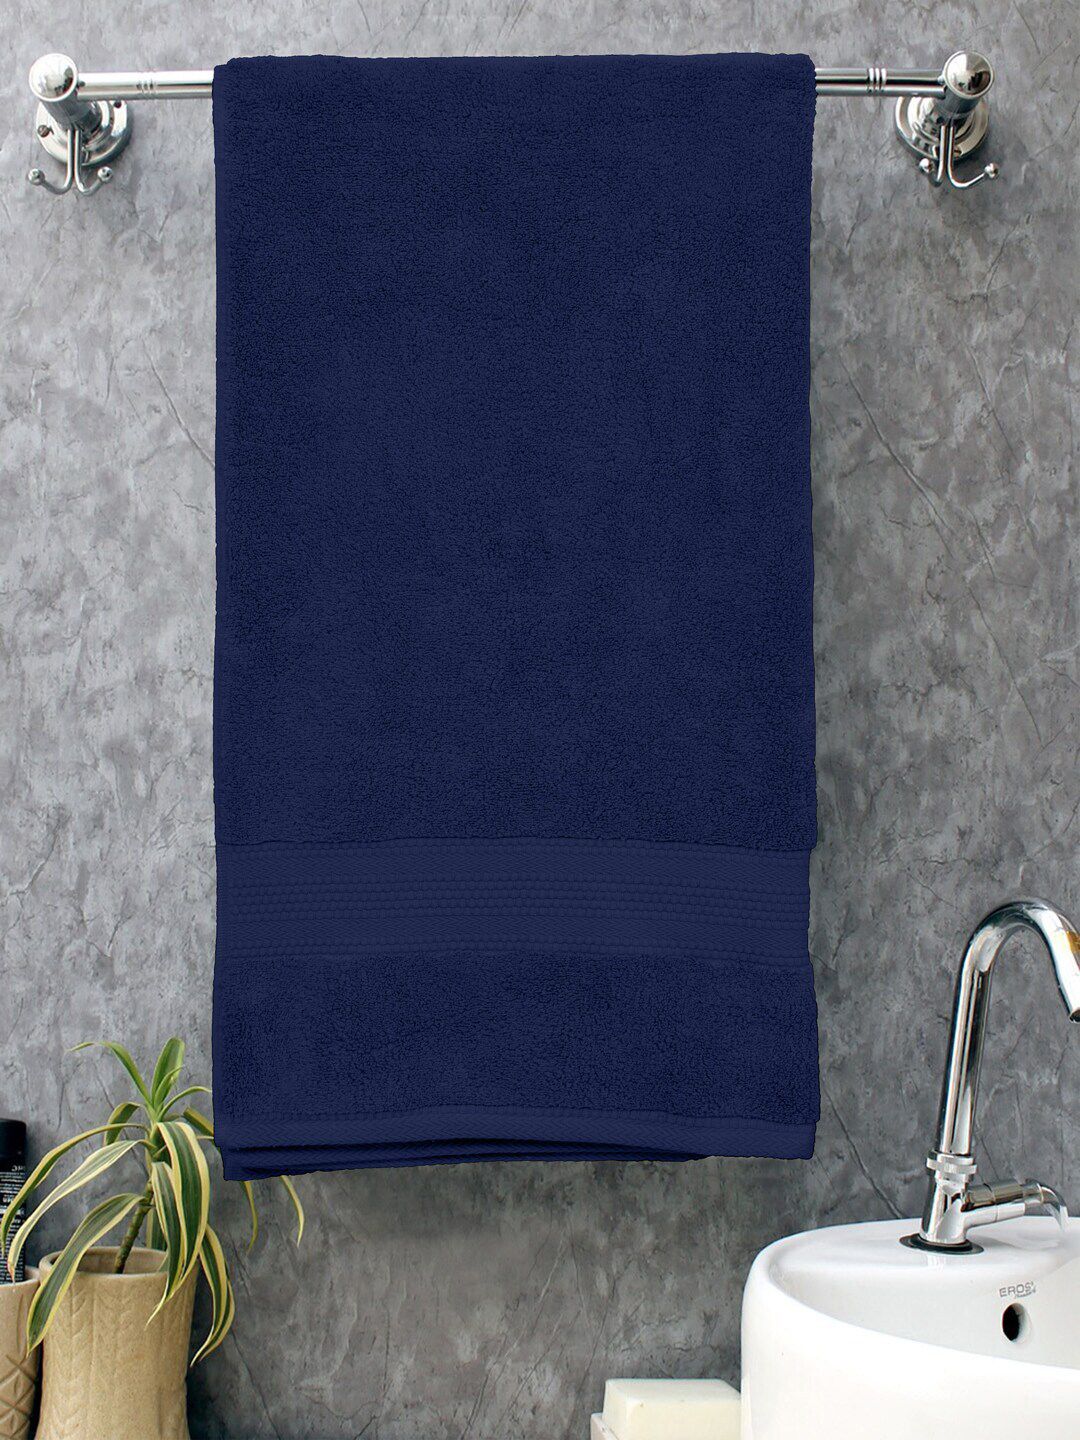 BOMBAY DYEING Navy Blue Solid Cotton 650 GSM Bath Towel Price in India